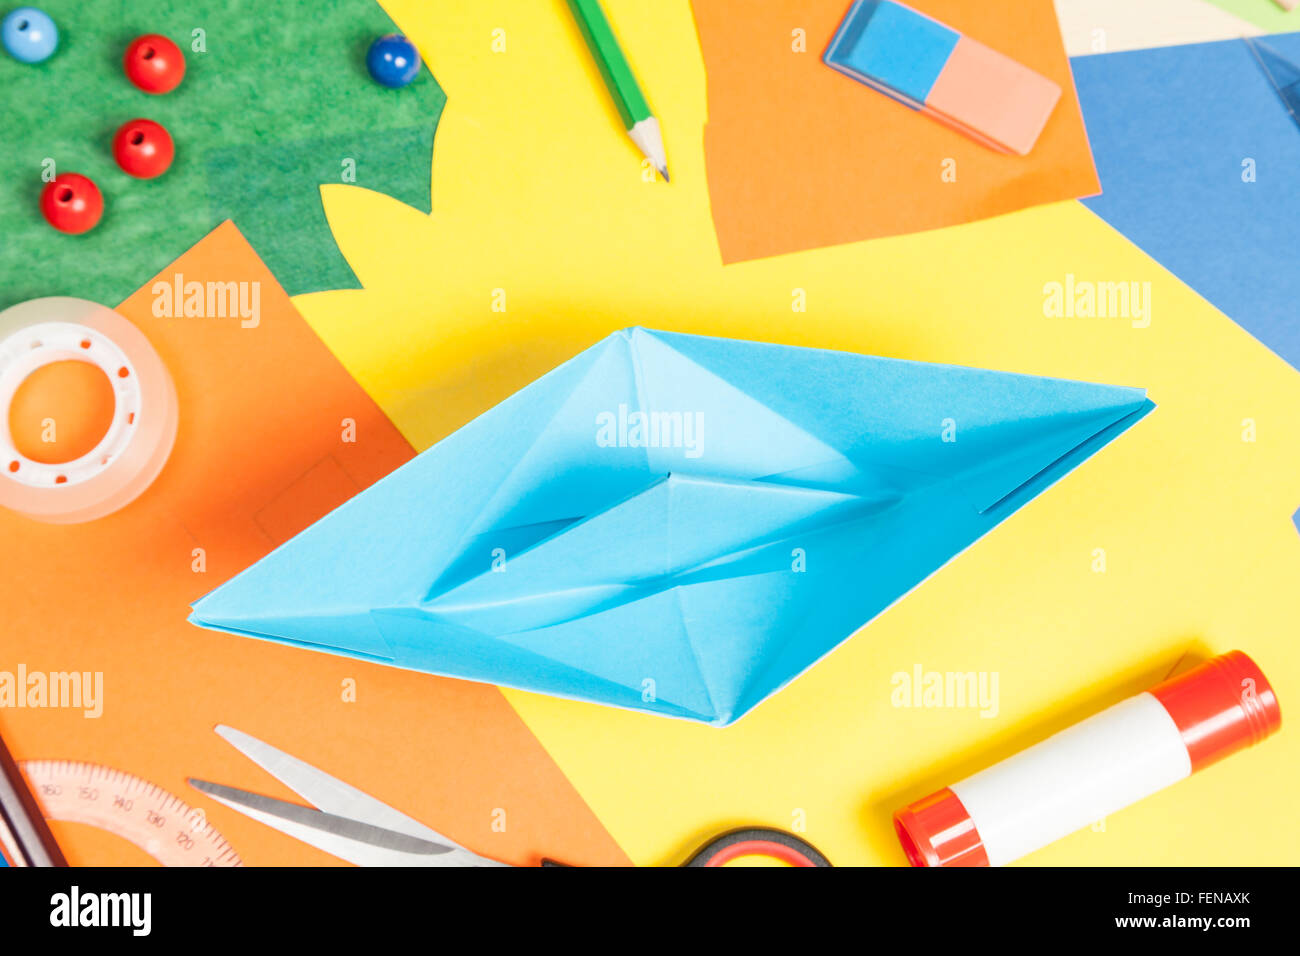 Tinker a paper boat Stock Photo